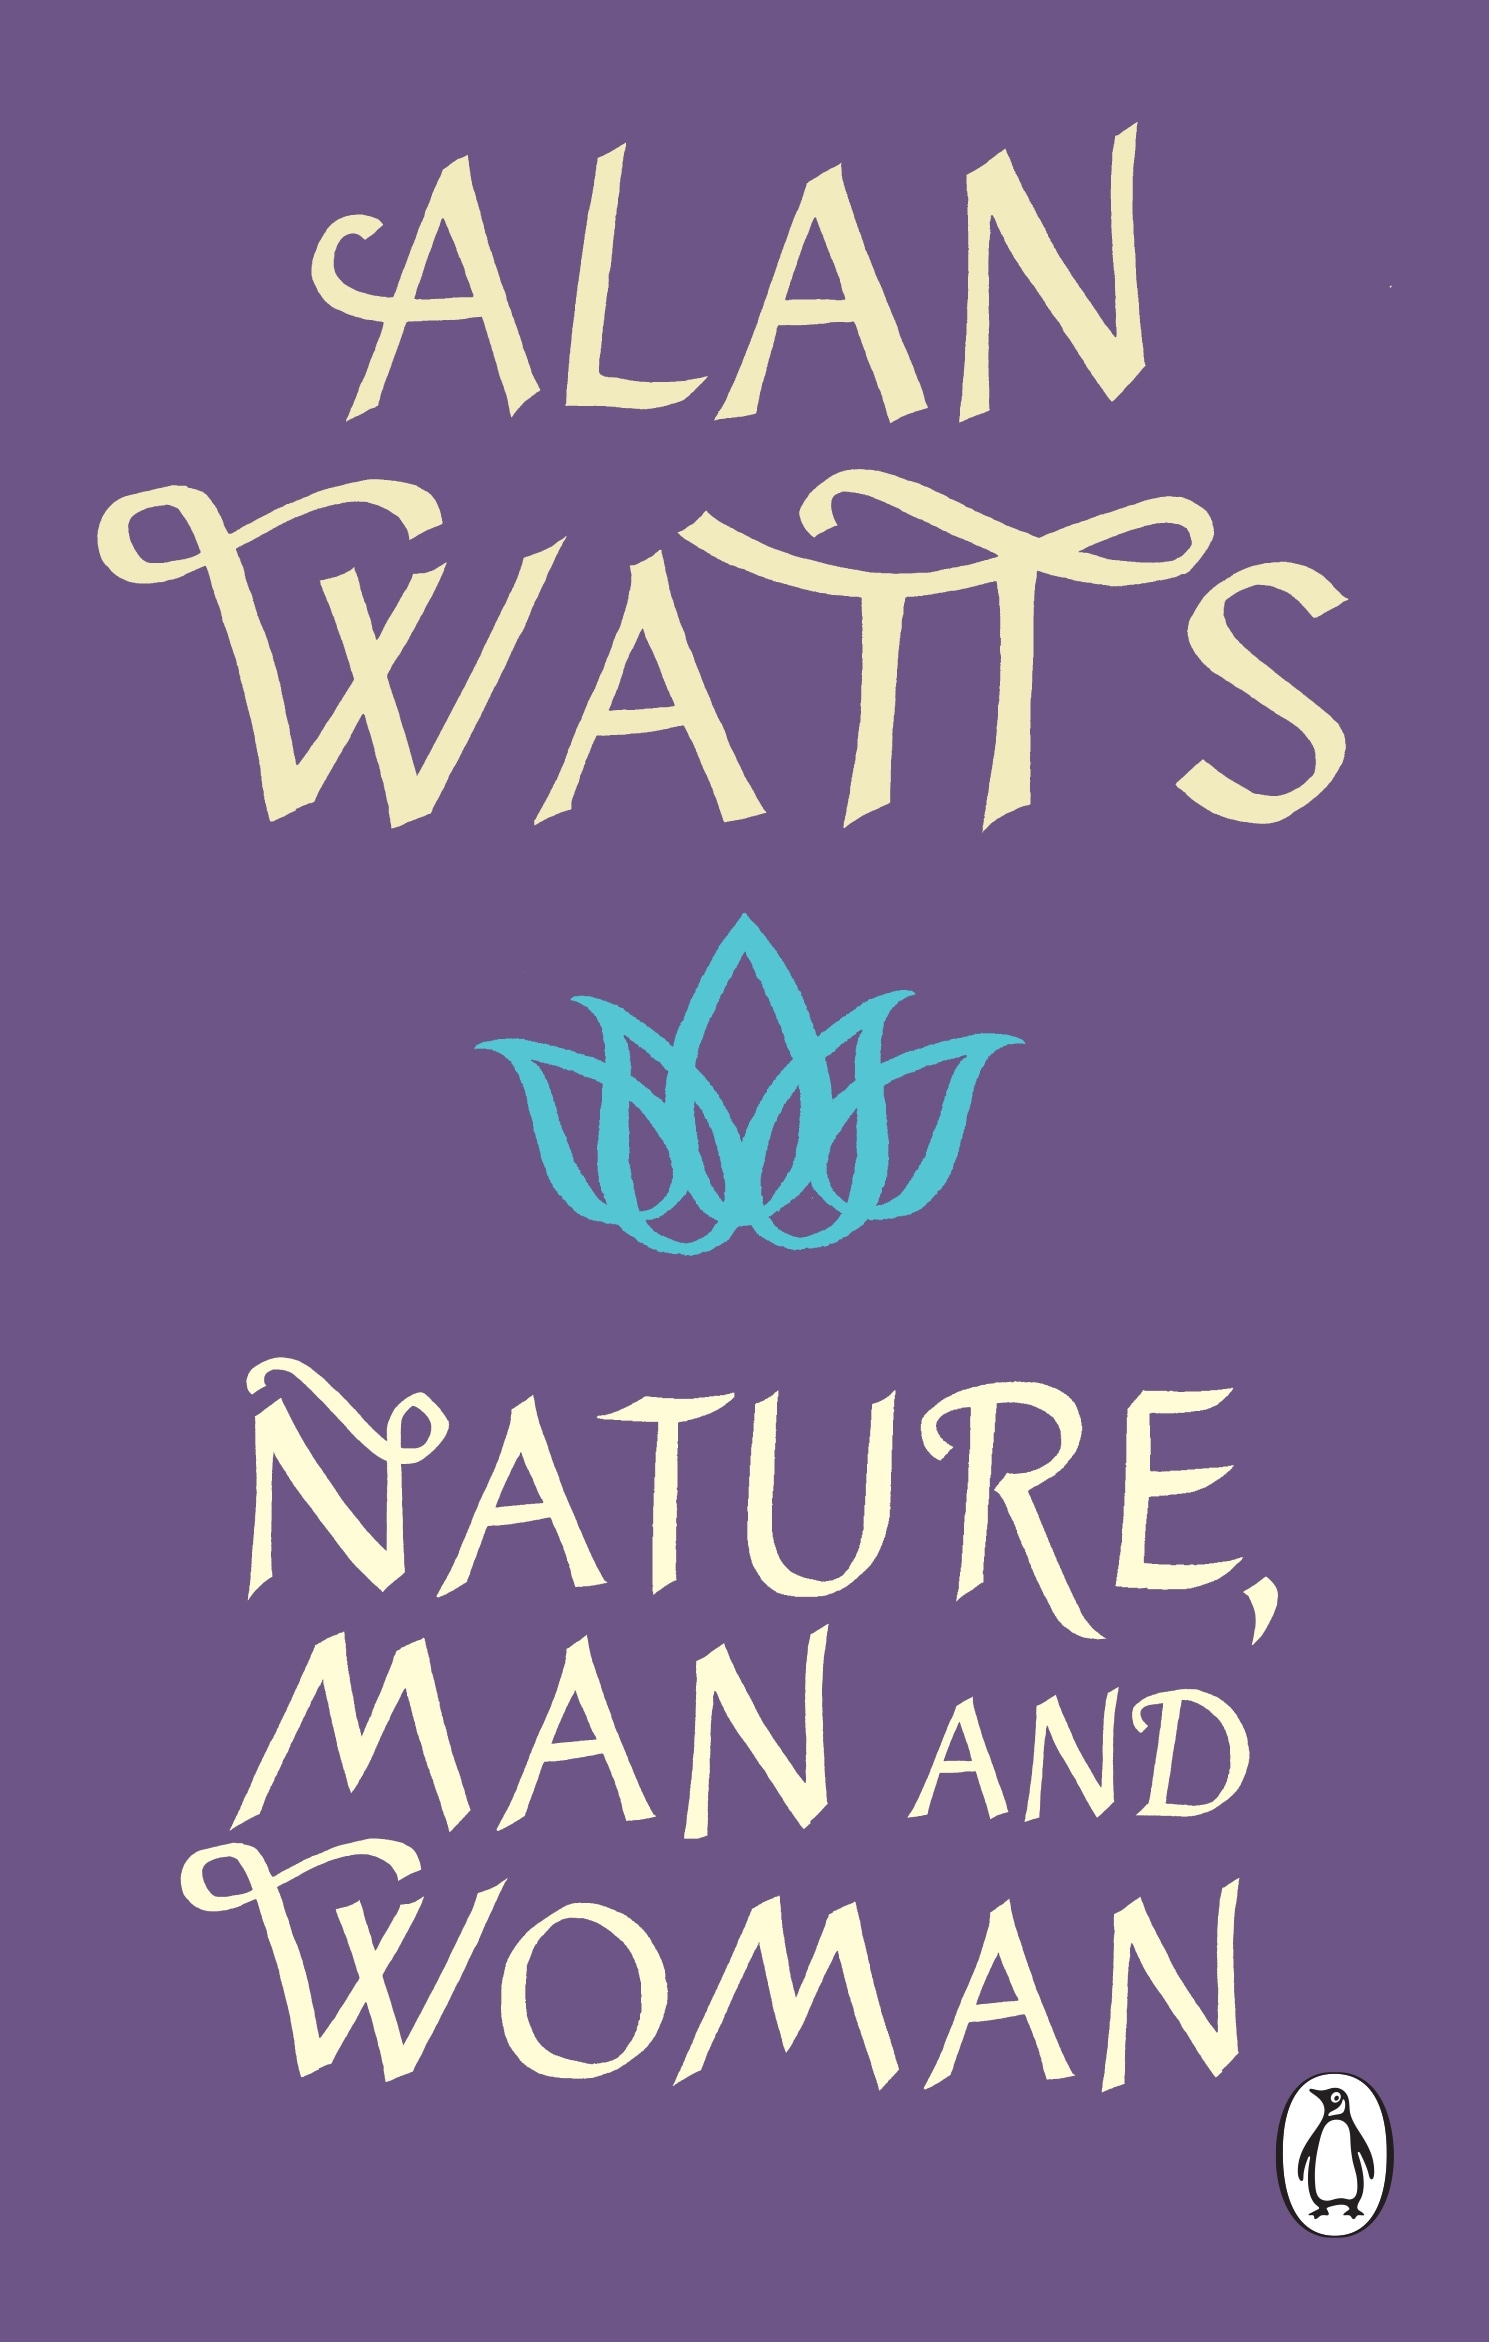 Book “Nature, Man and Woman” by Alan W Watts — February 3, 2022